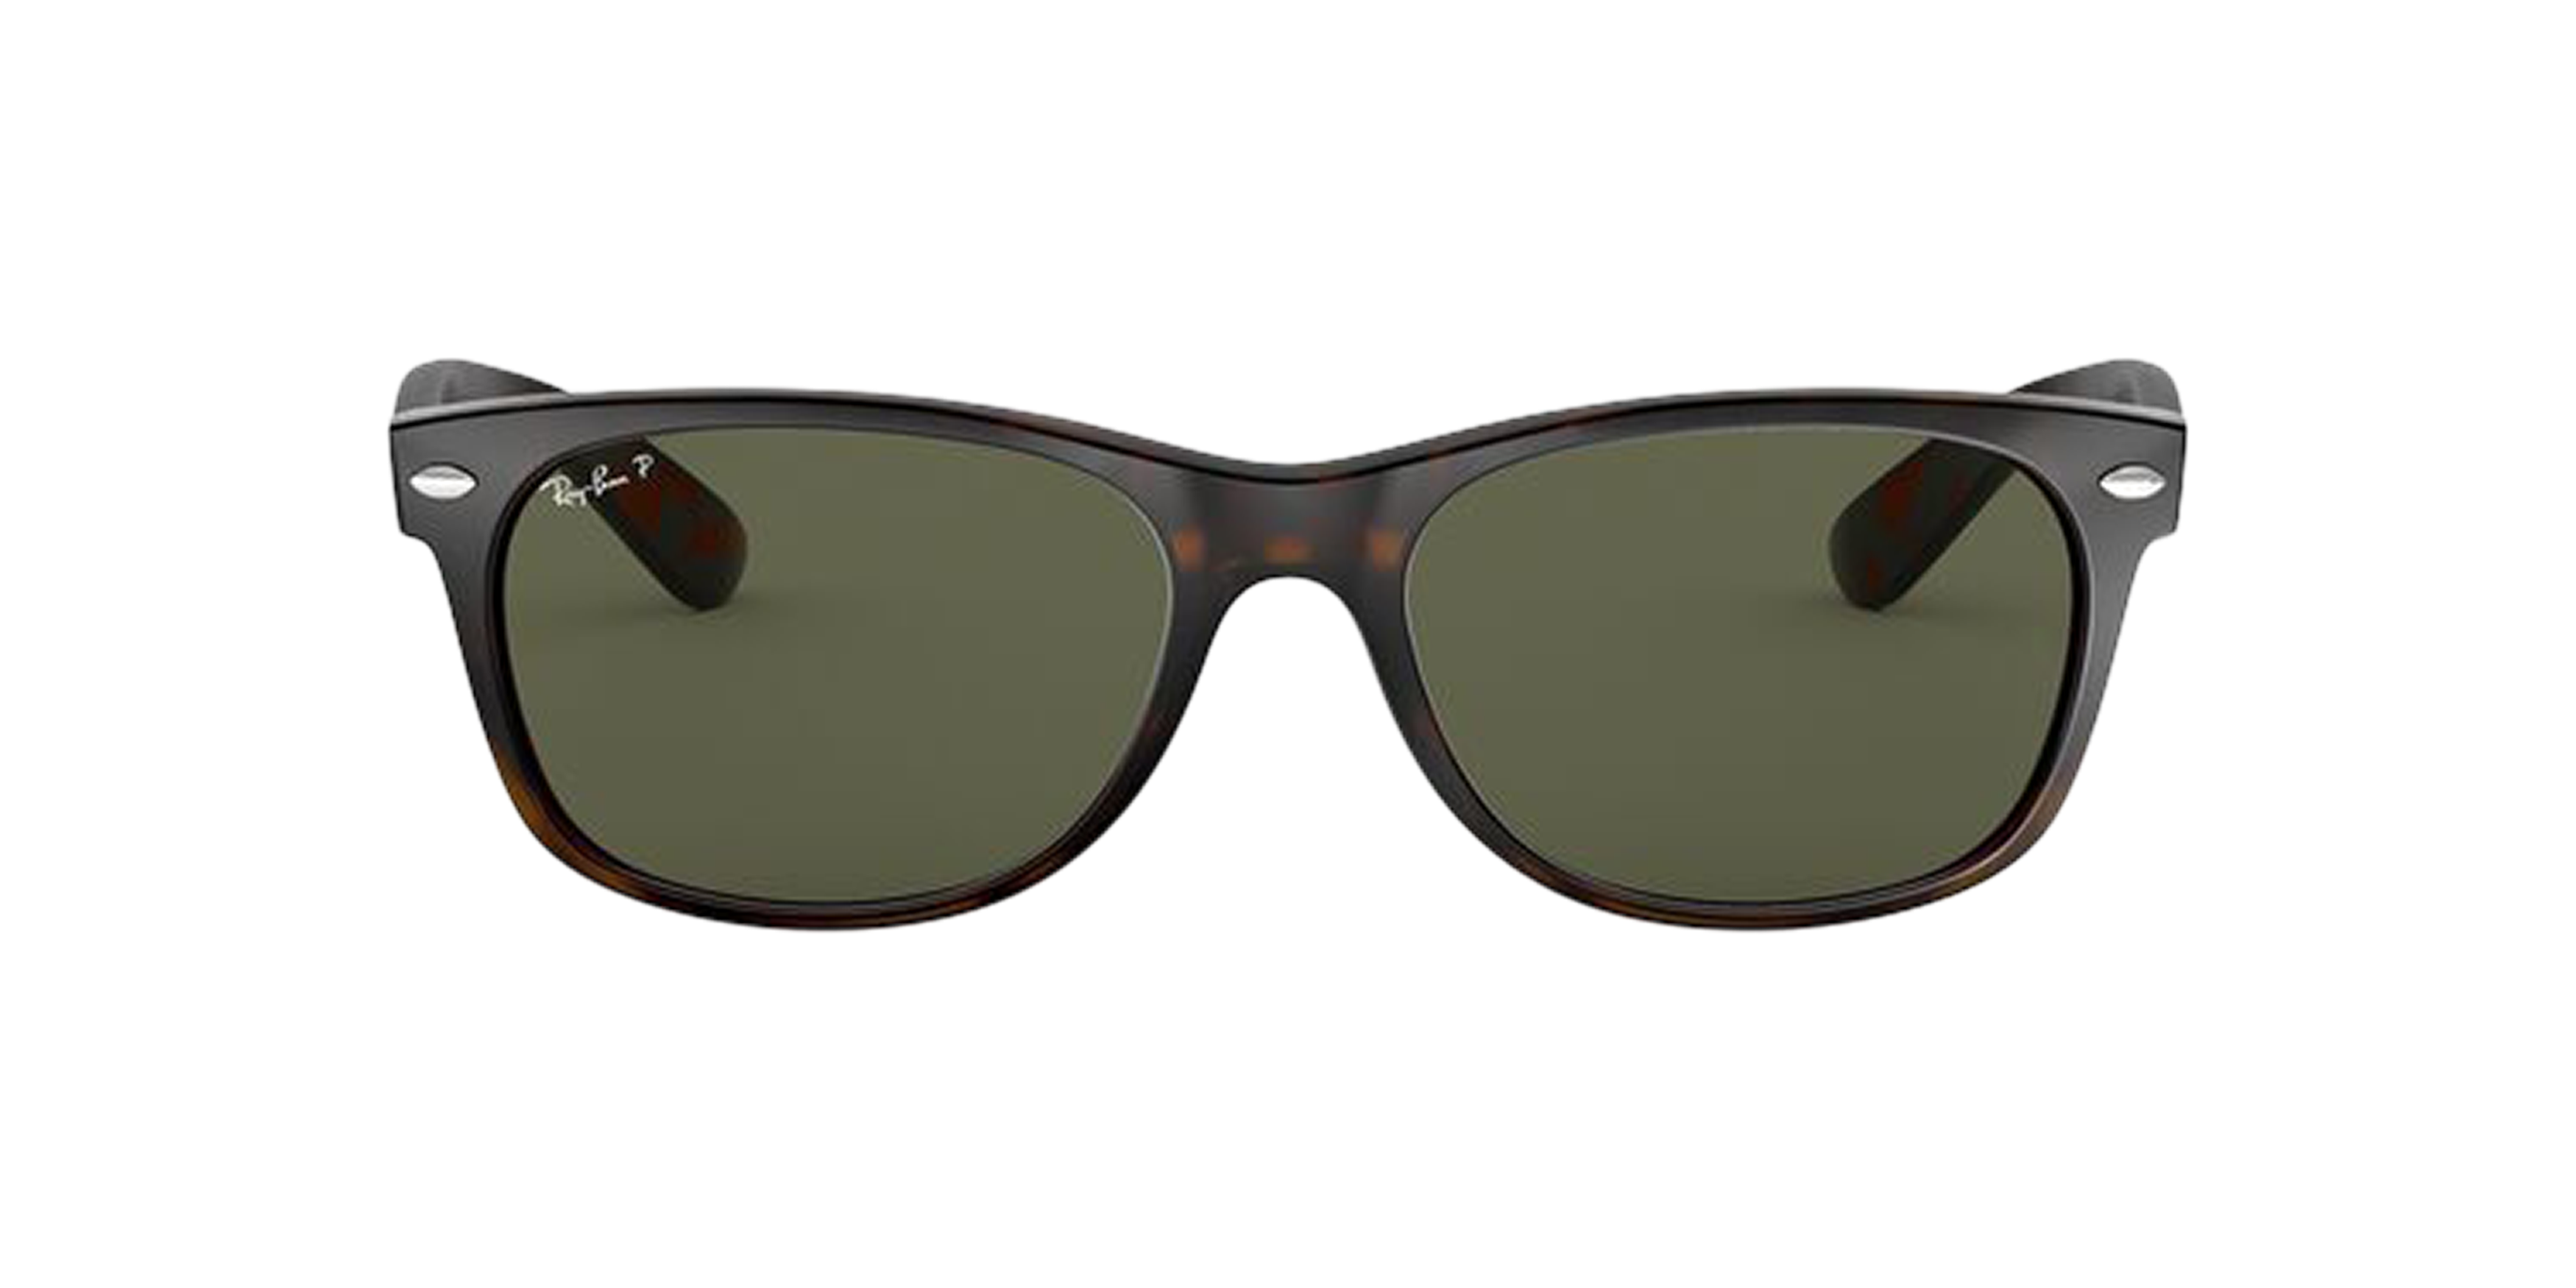 [products.image.front] Ray-Ban New Wayfarer Classic RB2132 902/58